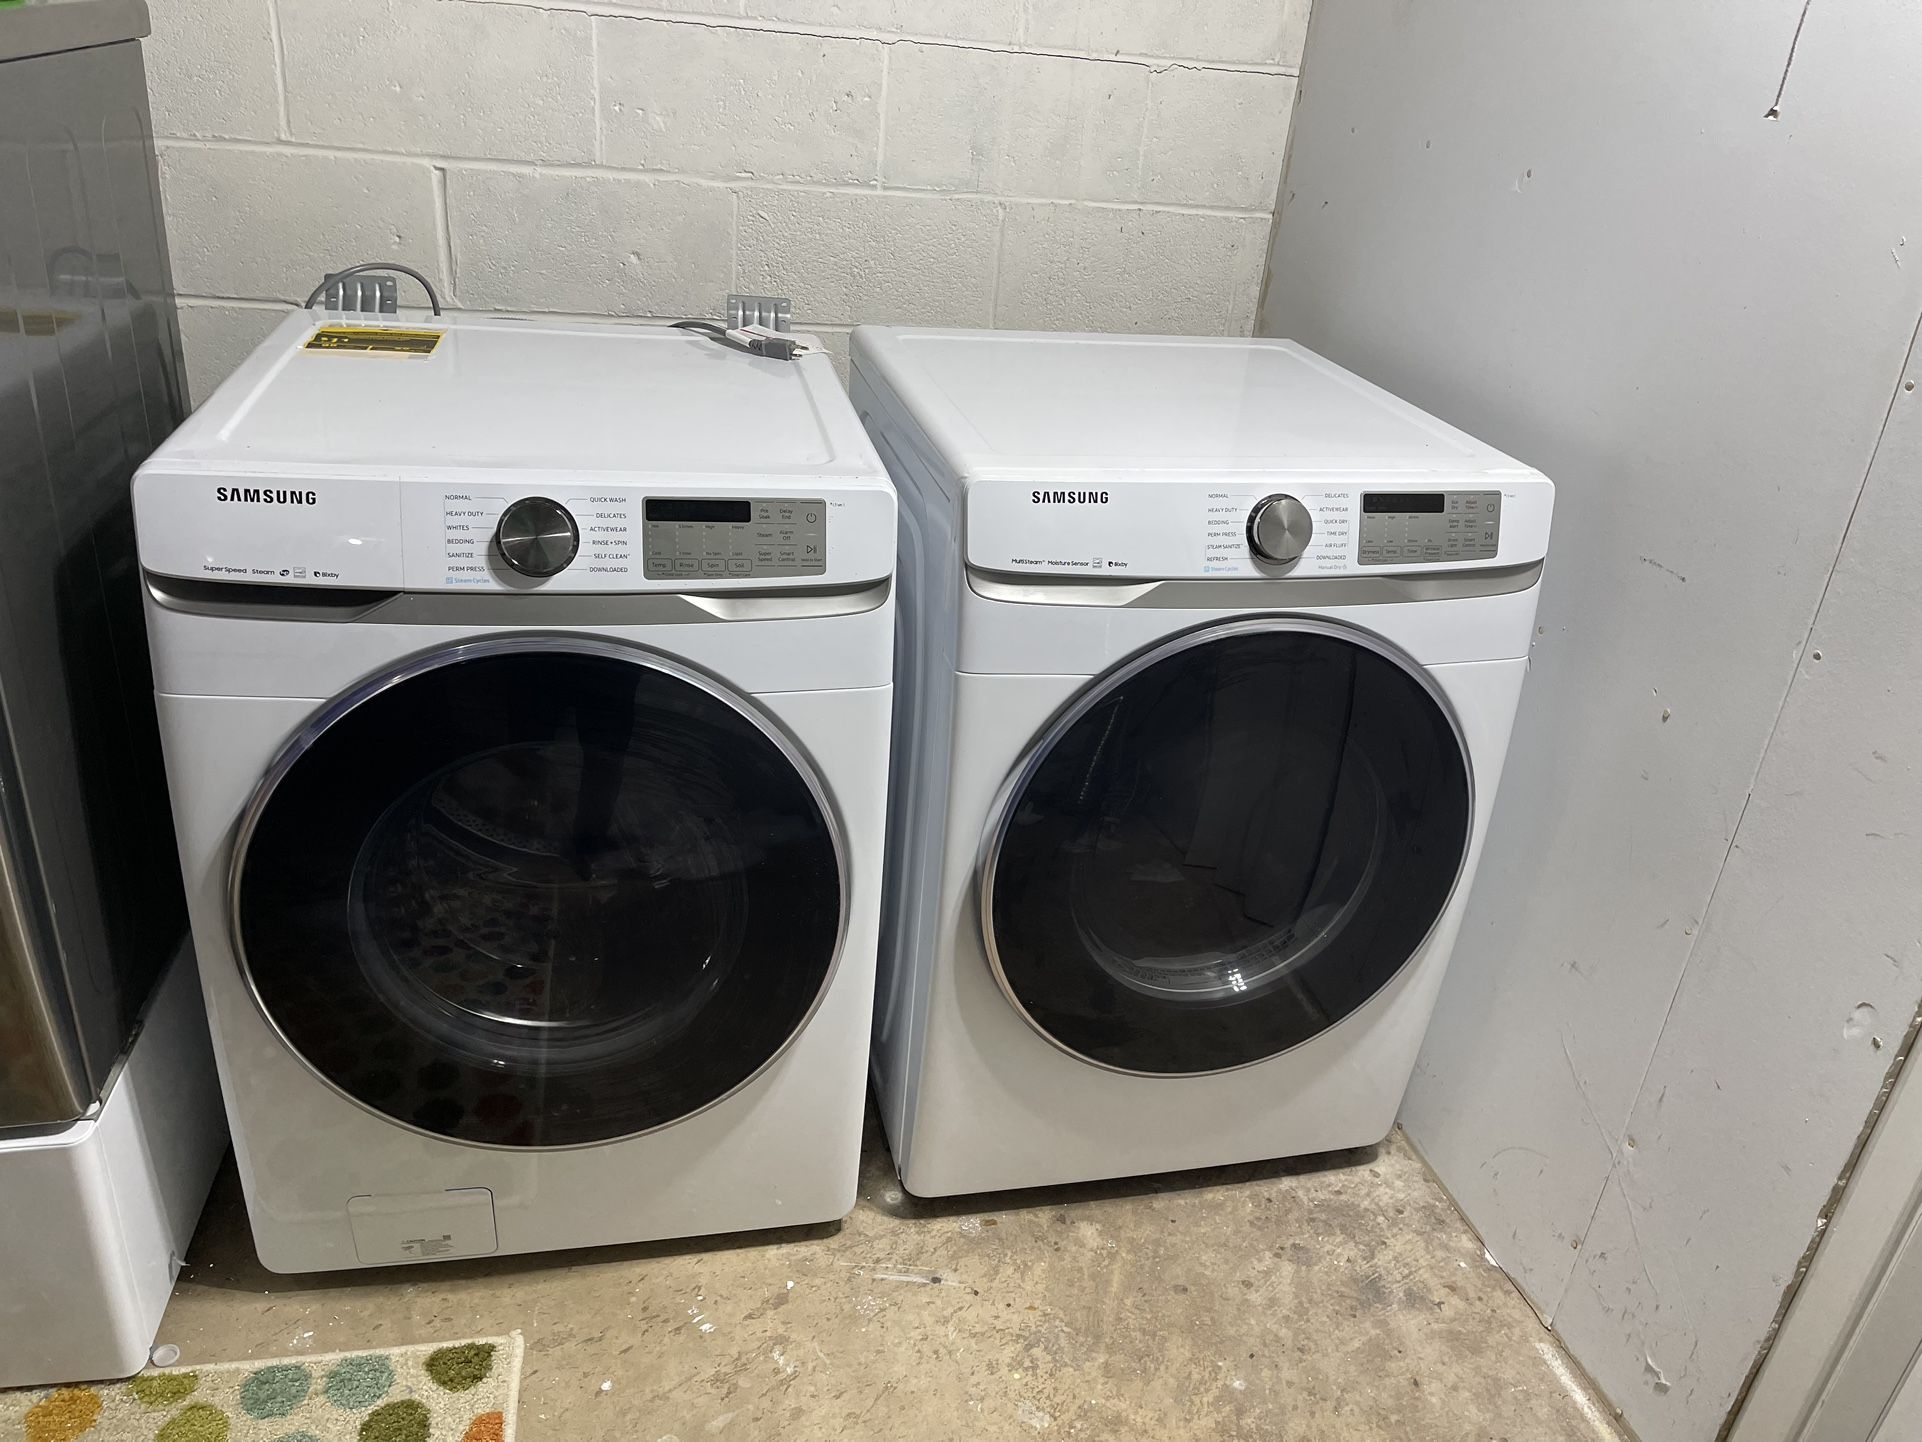 Samsung Washer & Dryer -2021 manufacturing Used only 2-3 times